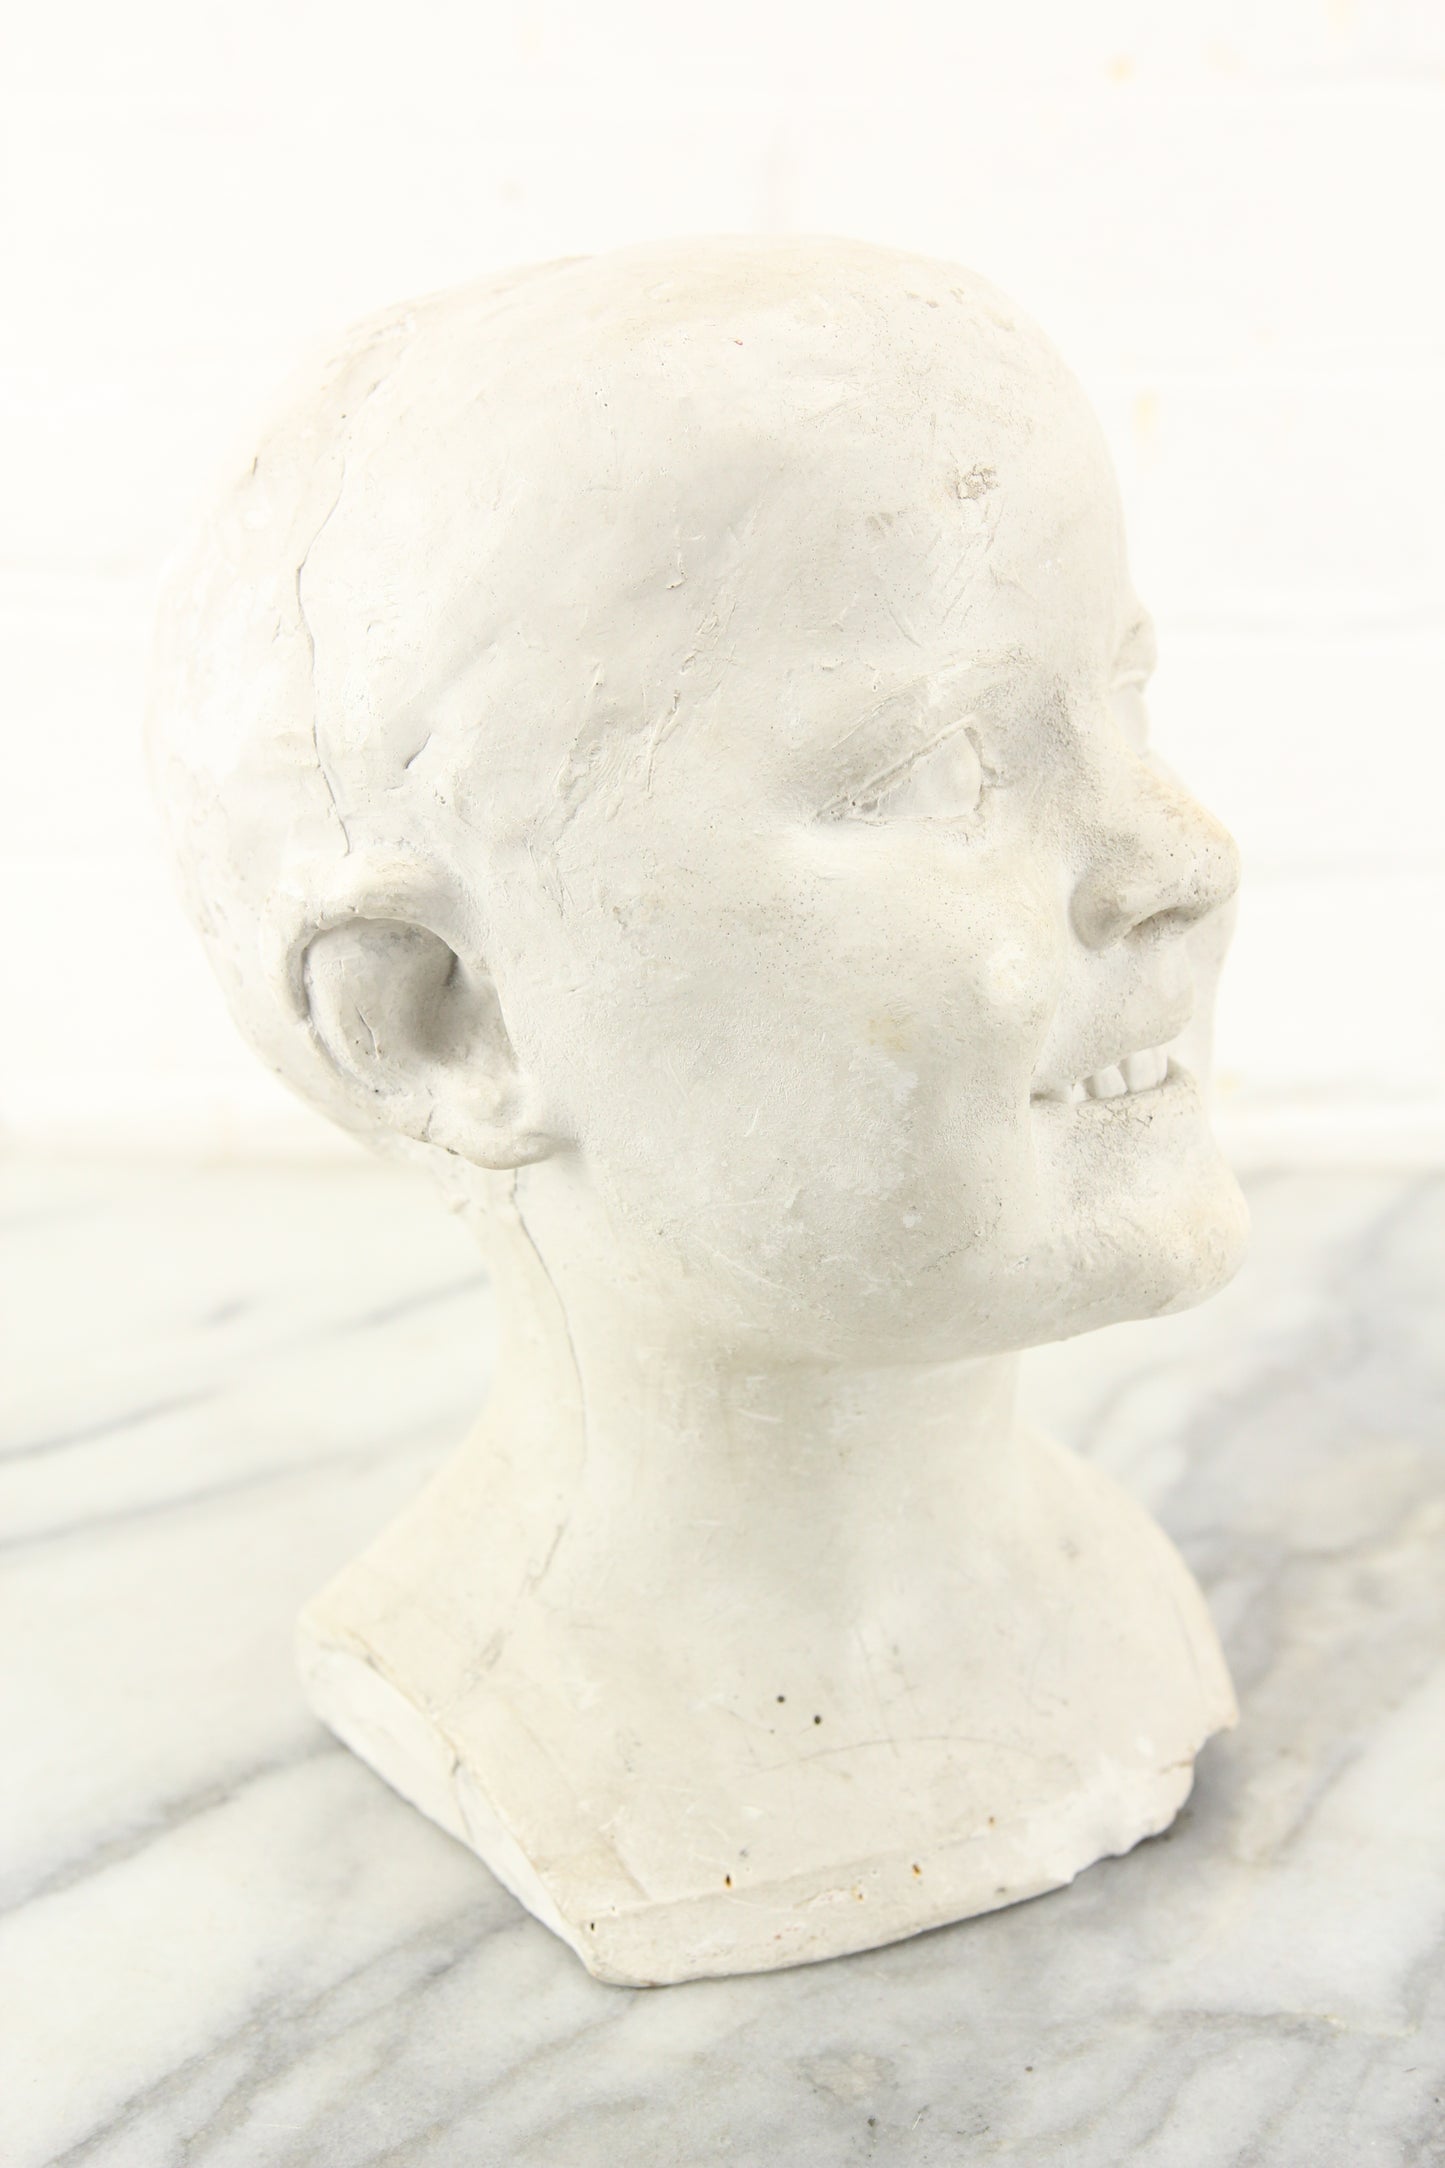 Antique Plaster Bust of a Slightly Creepy Child with a Toothy Smile